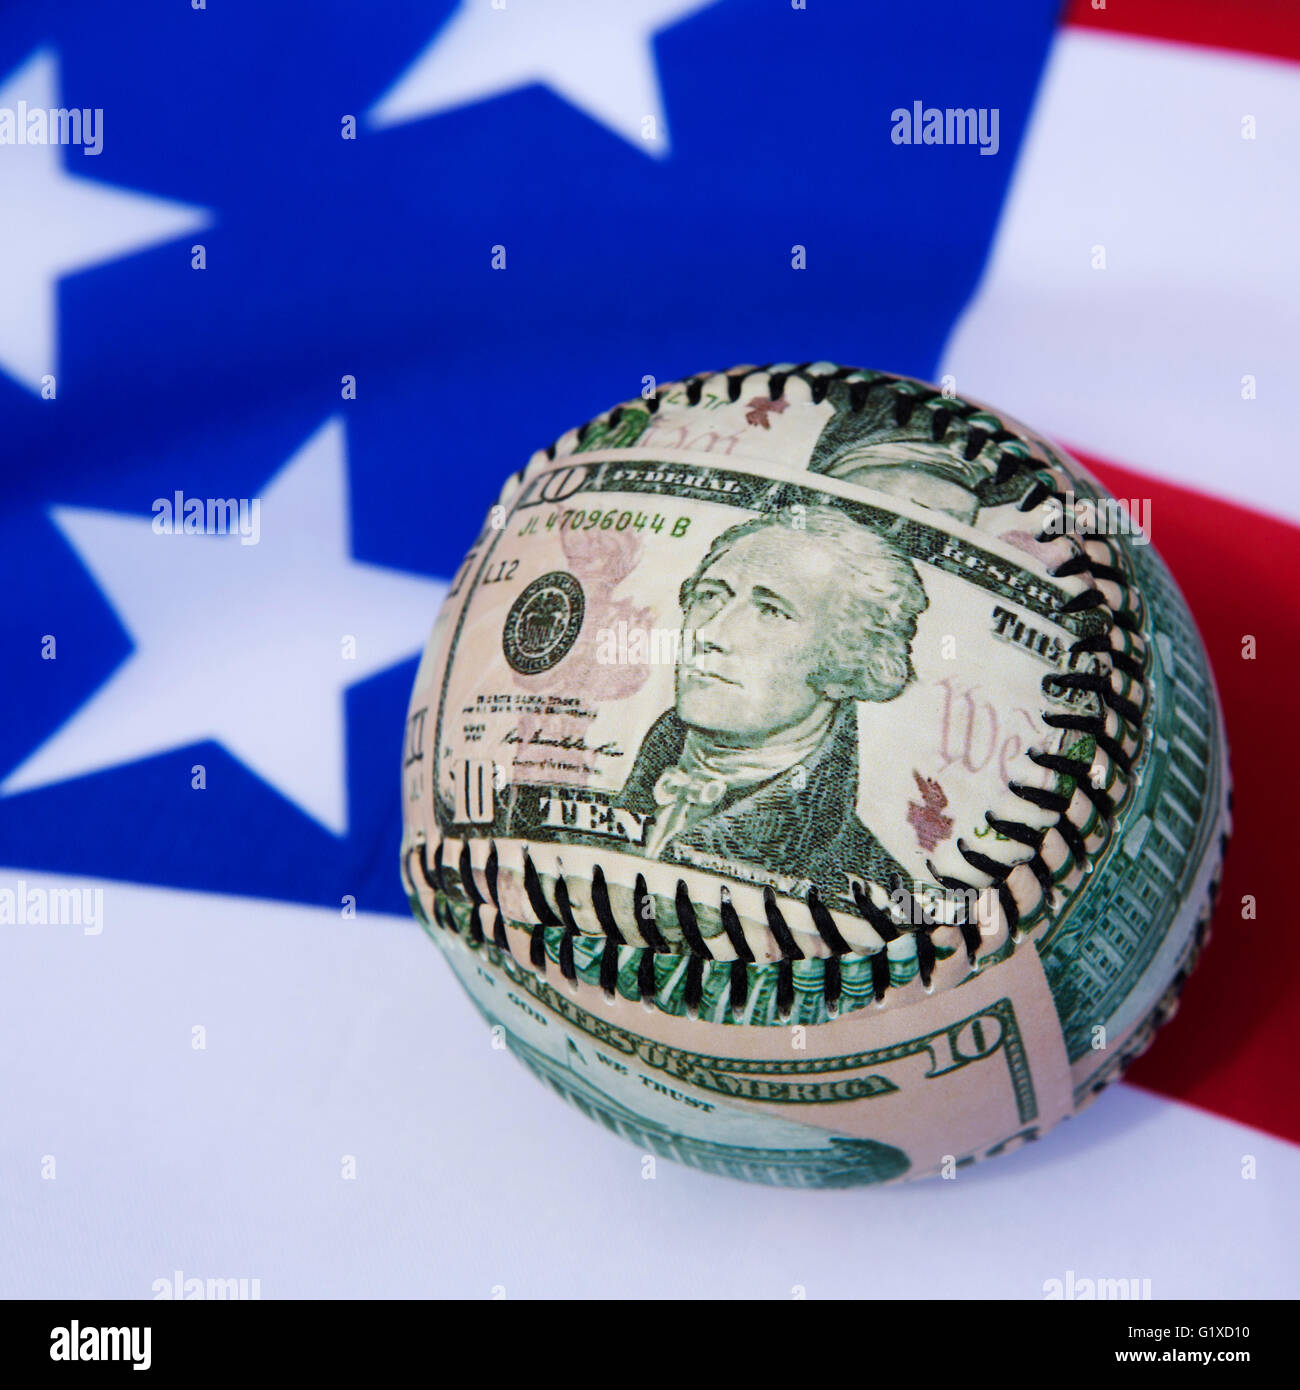 A baseball bearing the image of Alexander Hamilton, one of the Founding Fathers of the United States of America. Stock Photo